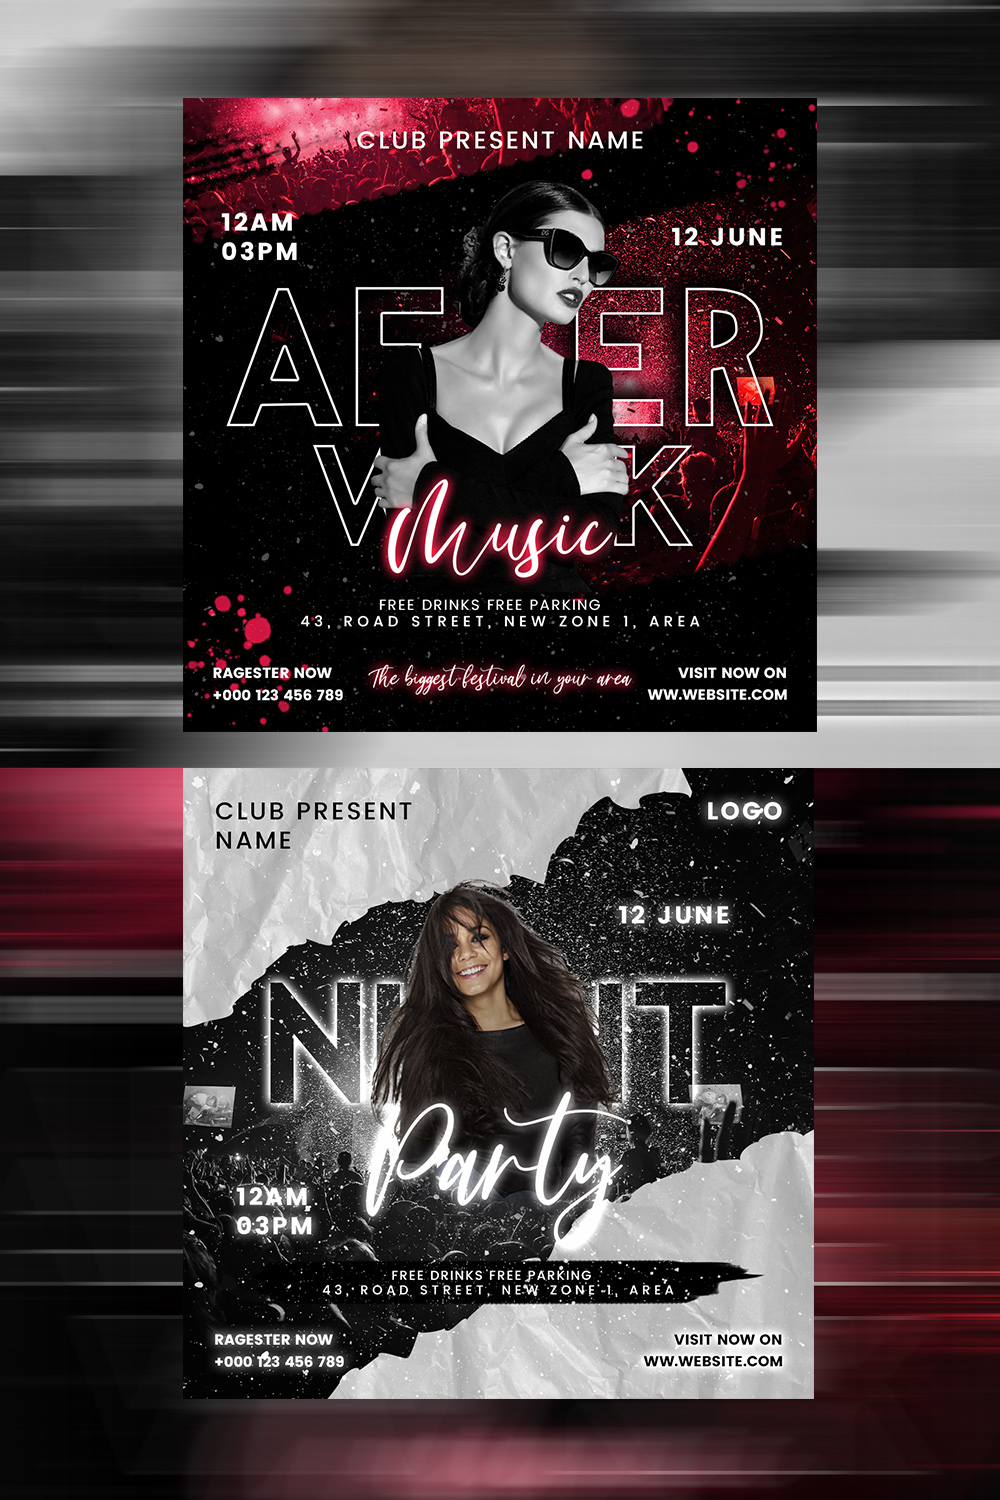 Music Party Flyer Photoshop Template psd pinterest preview image.